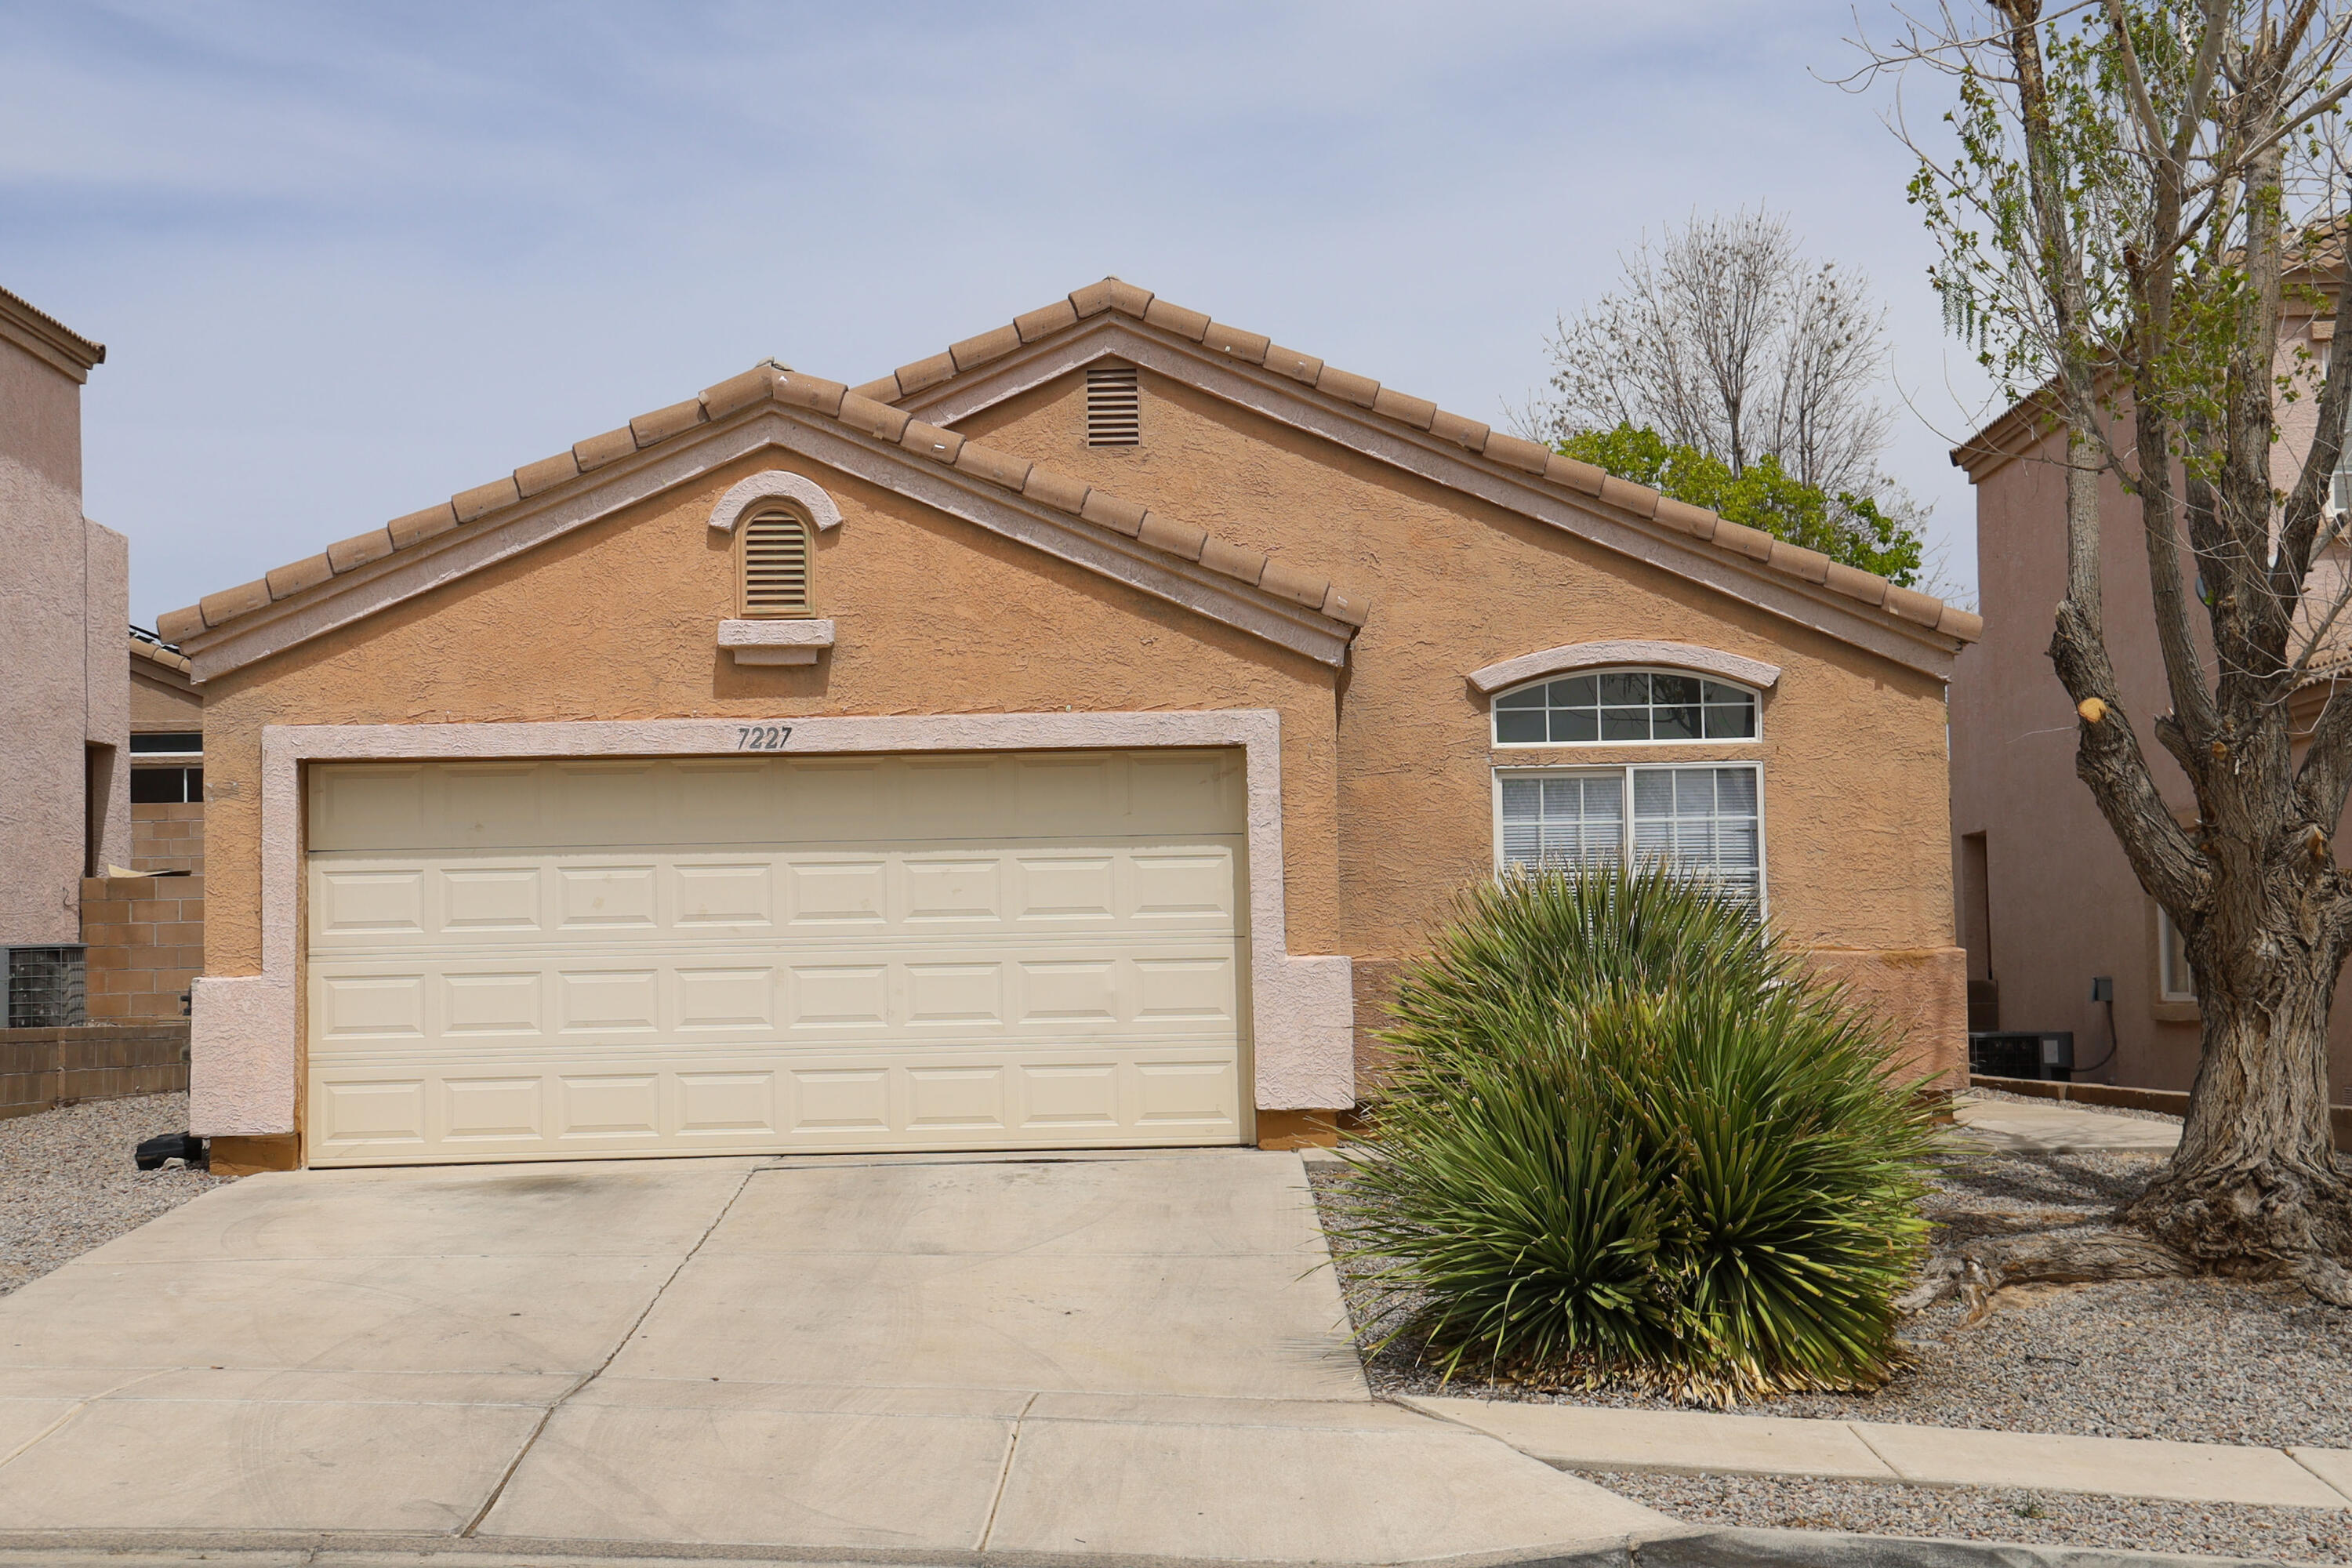 Beautiful home conveniently  located next to Paseo Del Norte! Built in the early 2000's, refrigerated cooling and all appliances included as-is. Beautiful neighborhood, and great location!